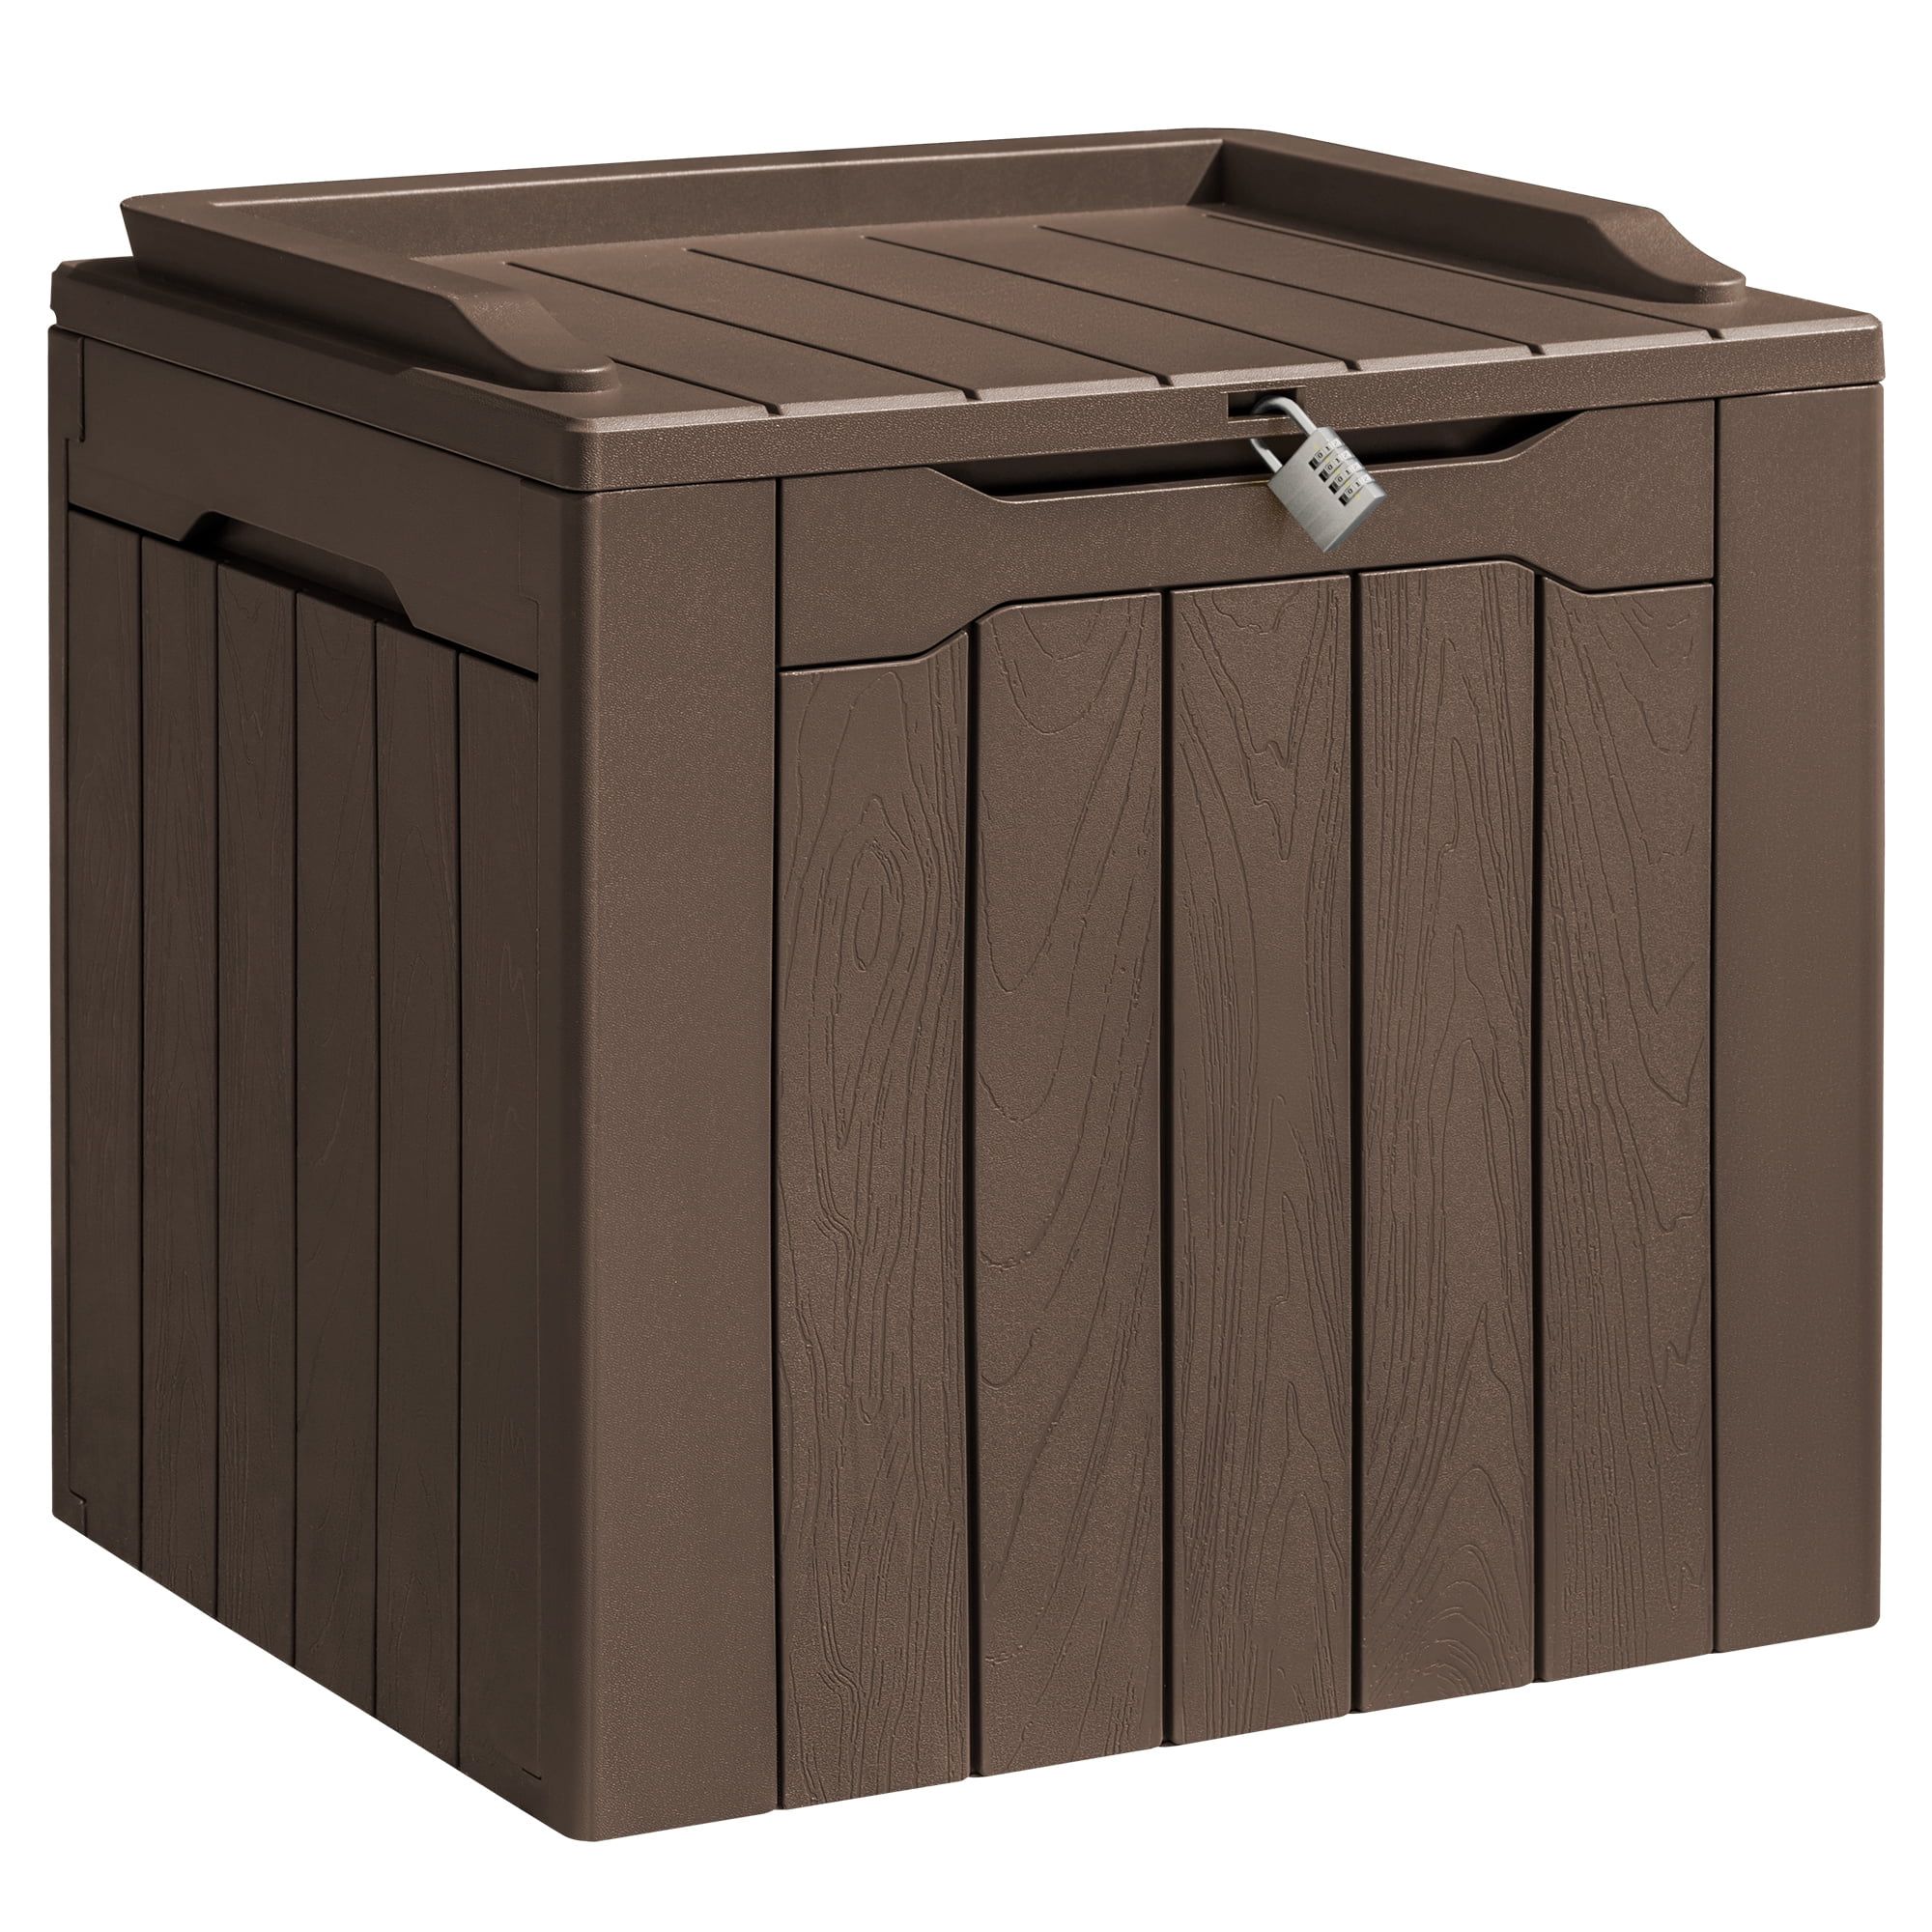 Homall 31 Gallon Outdoor Deck Box In Resin with Seat, Brown | Walmart (US)